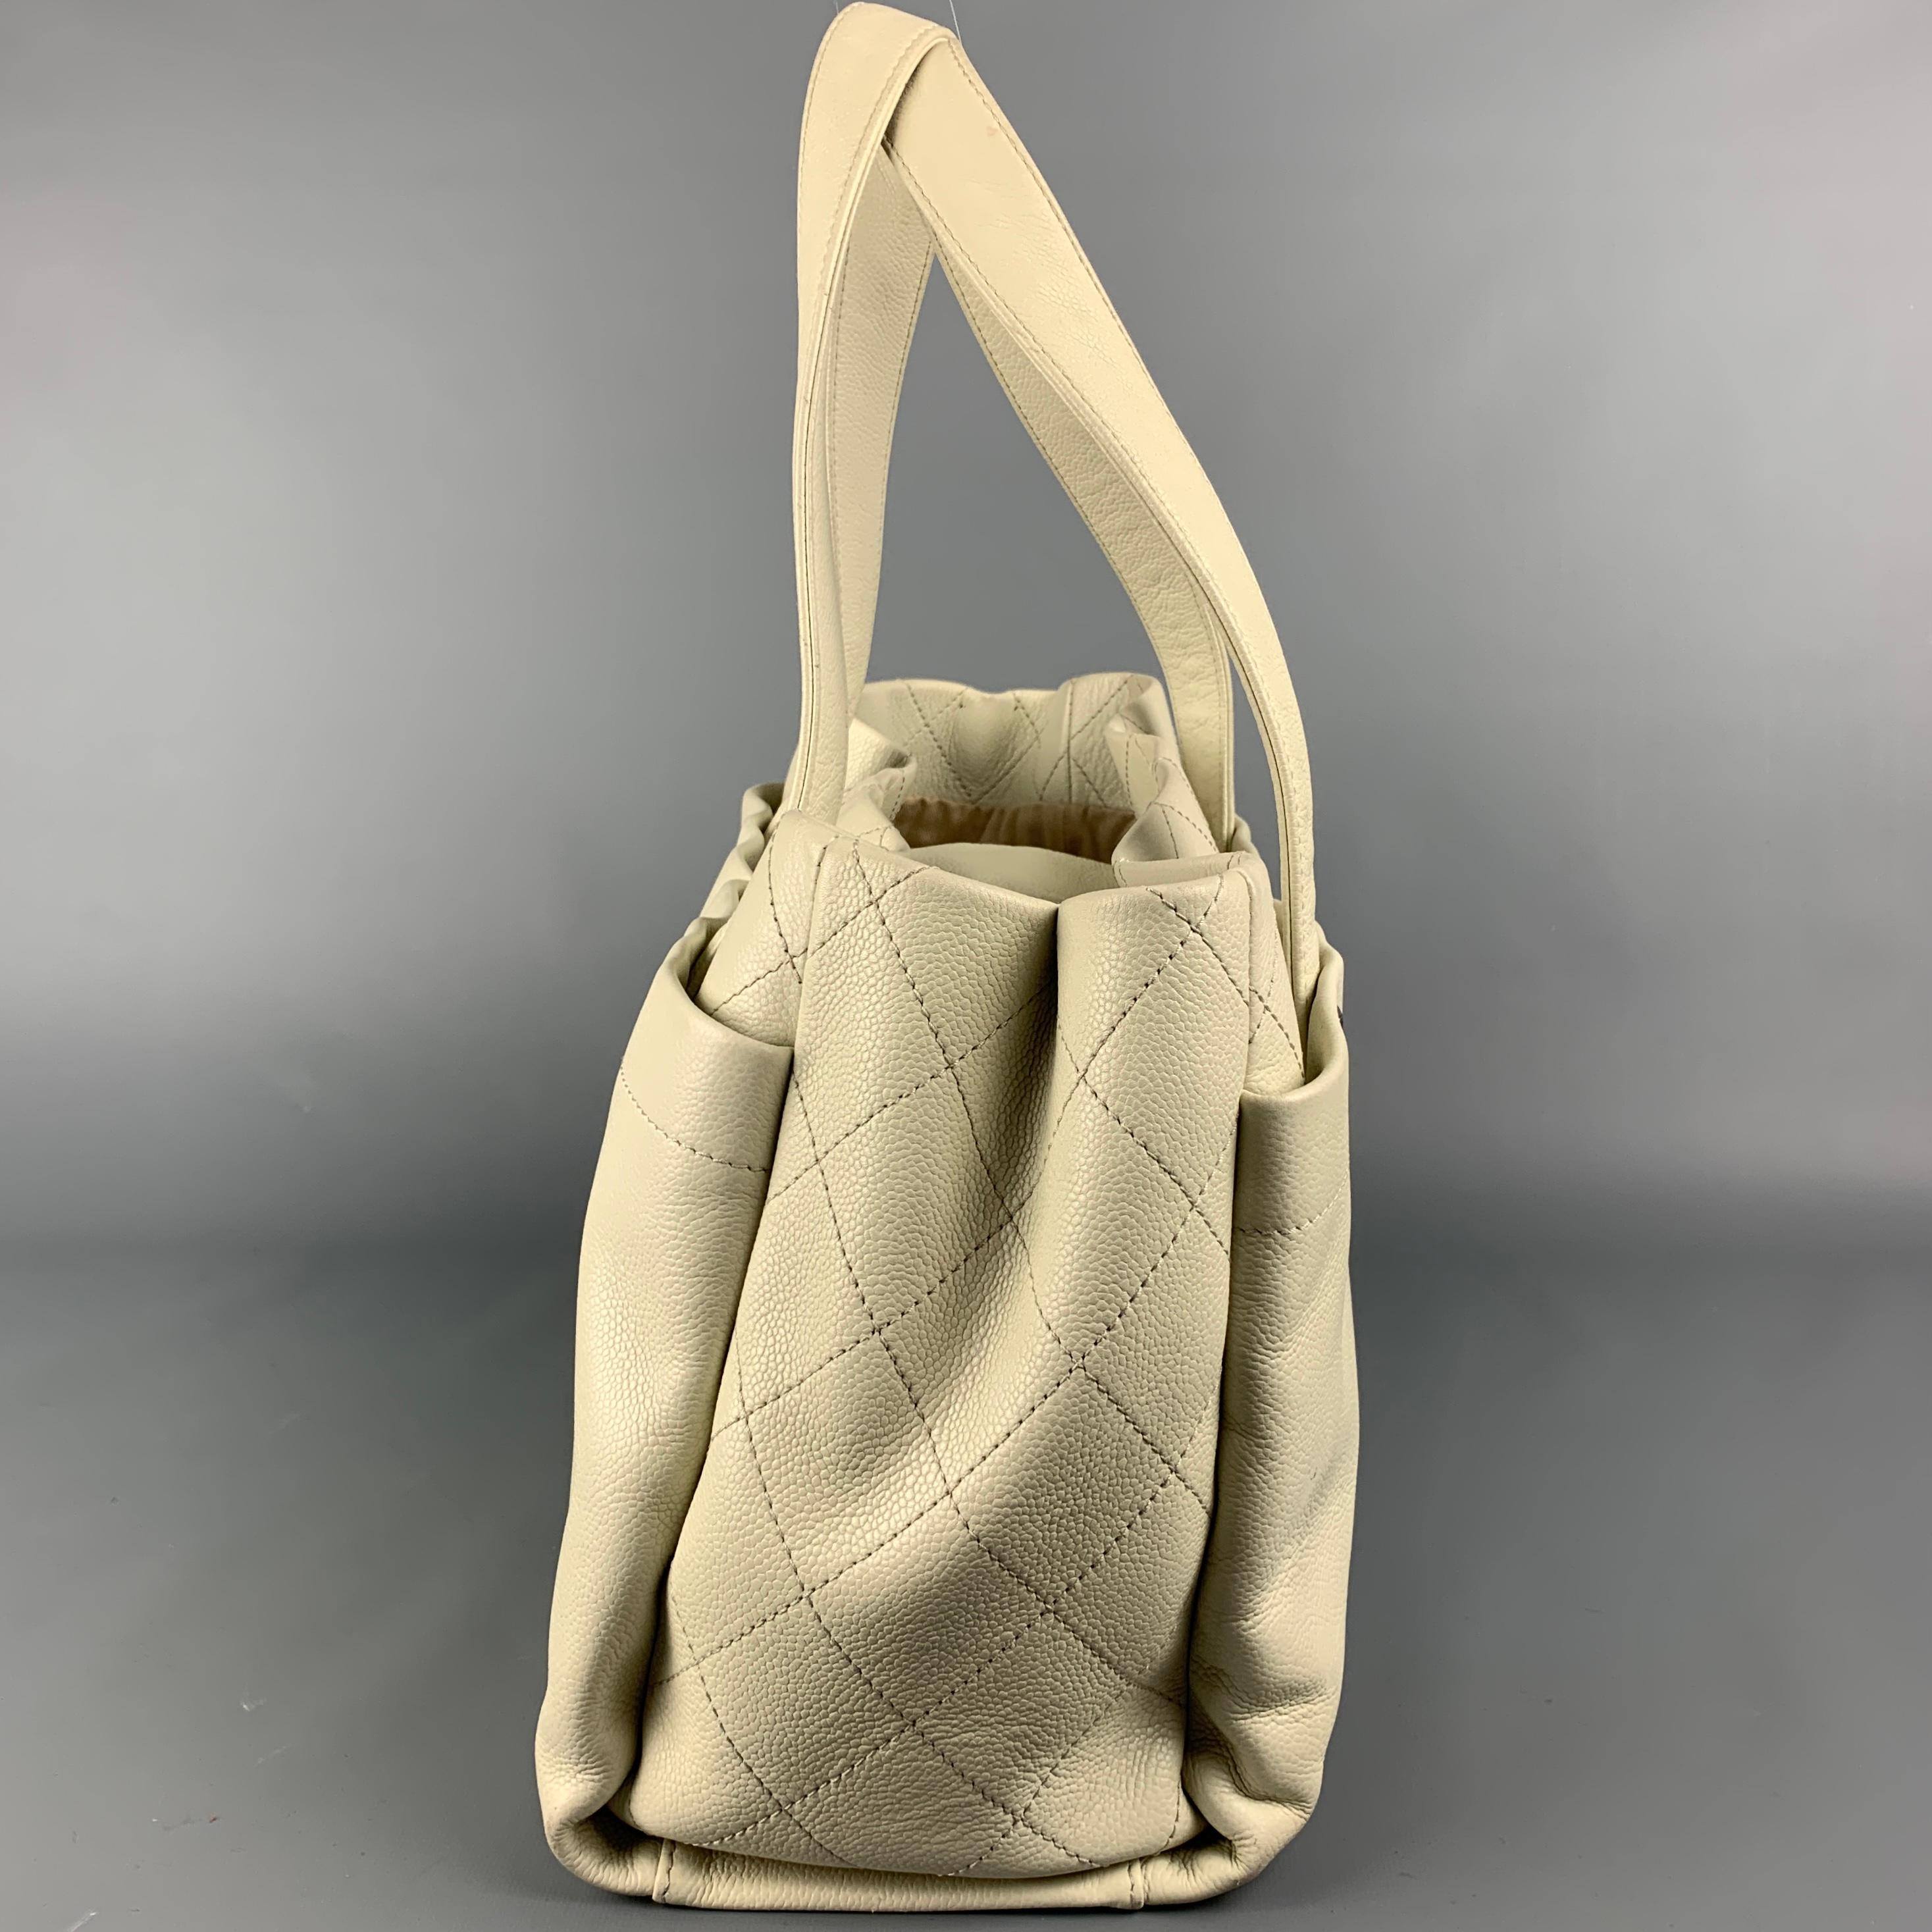 Beige CHANEL Ivory Quilted Leather Tote Handbag